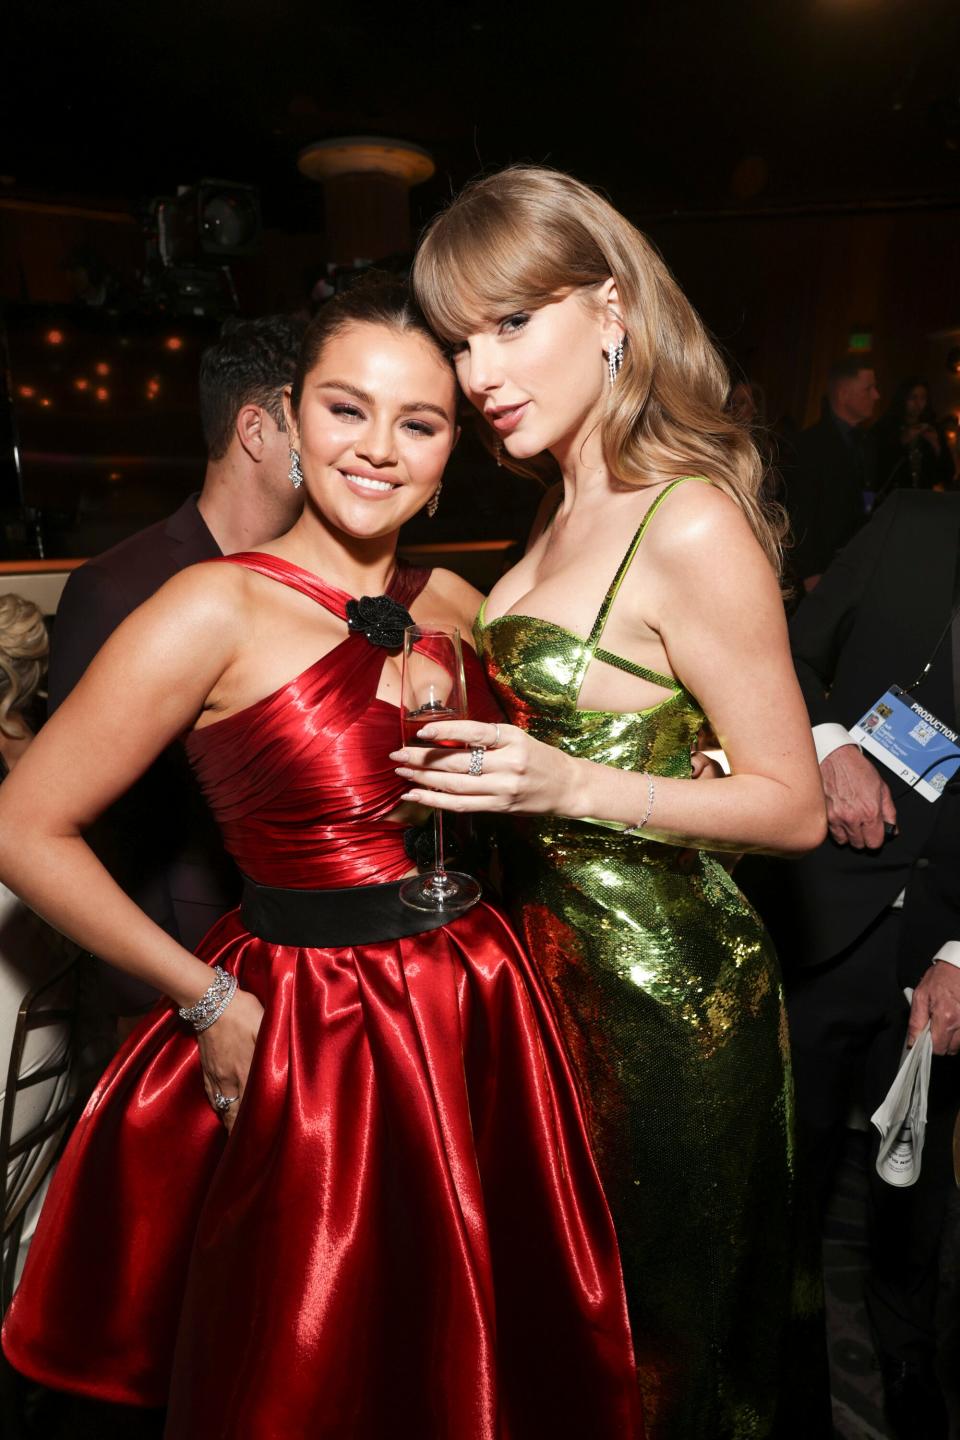 Good pals Selena Gomez and Taylor Swift shared a hug at the Golden Globes.